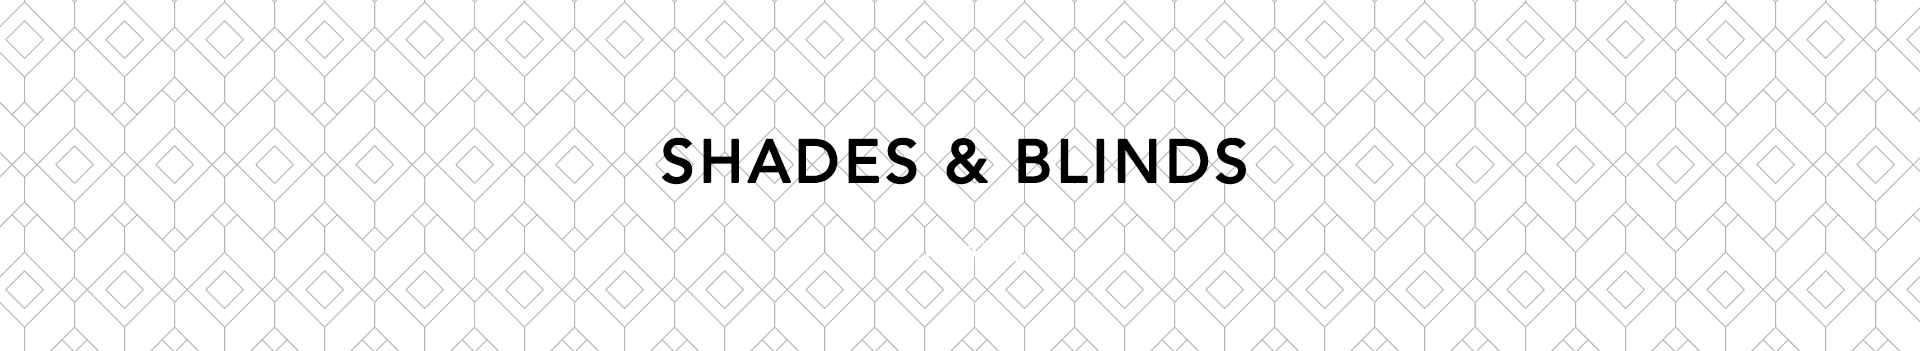 shades-and-blinds-slider